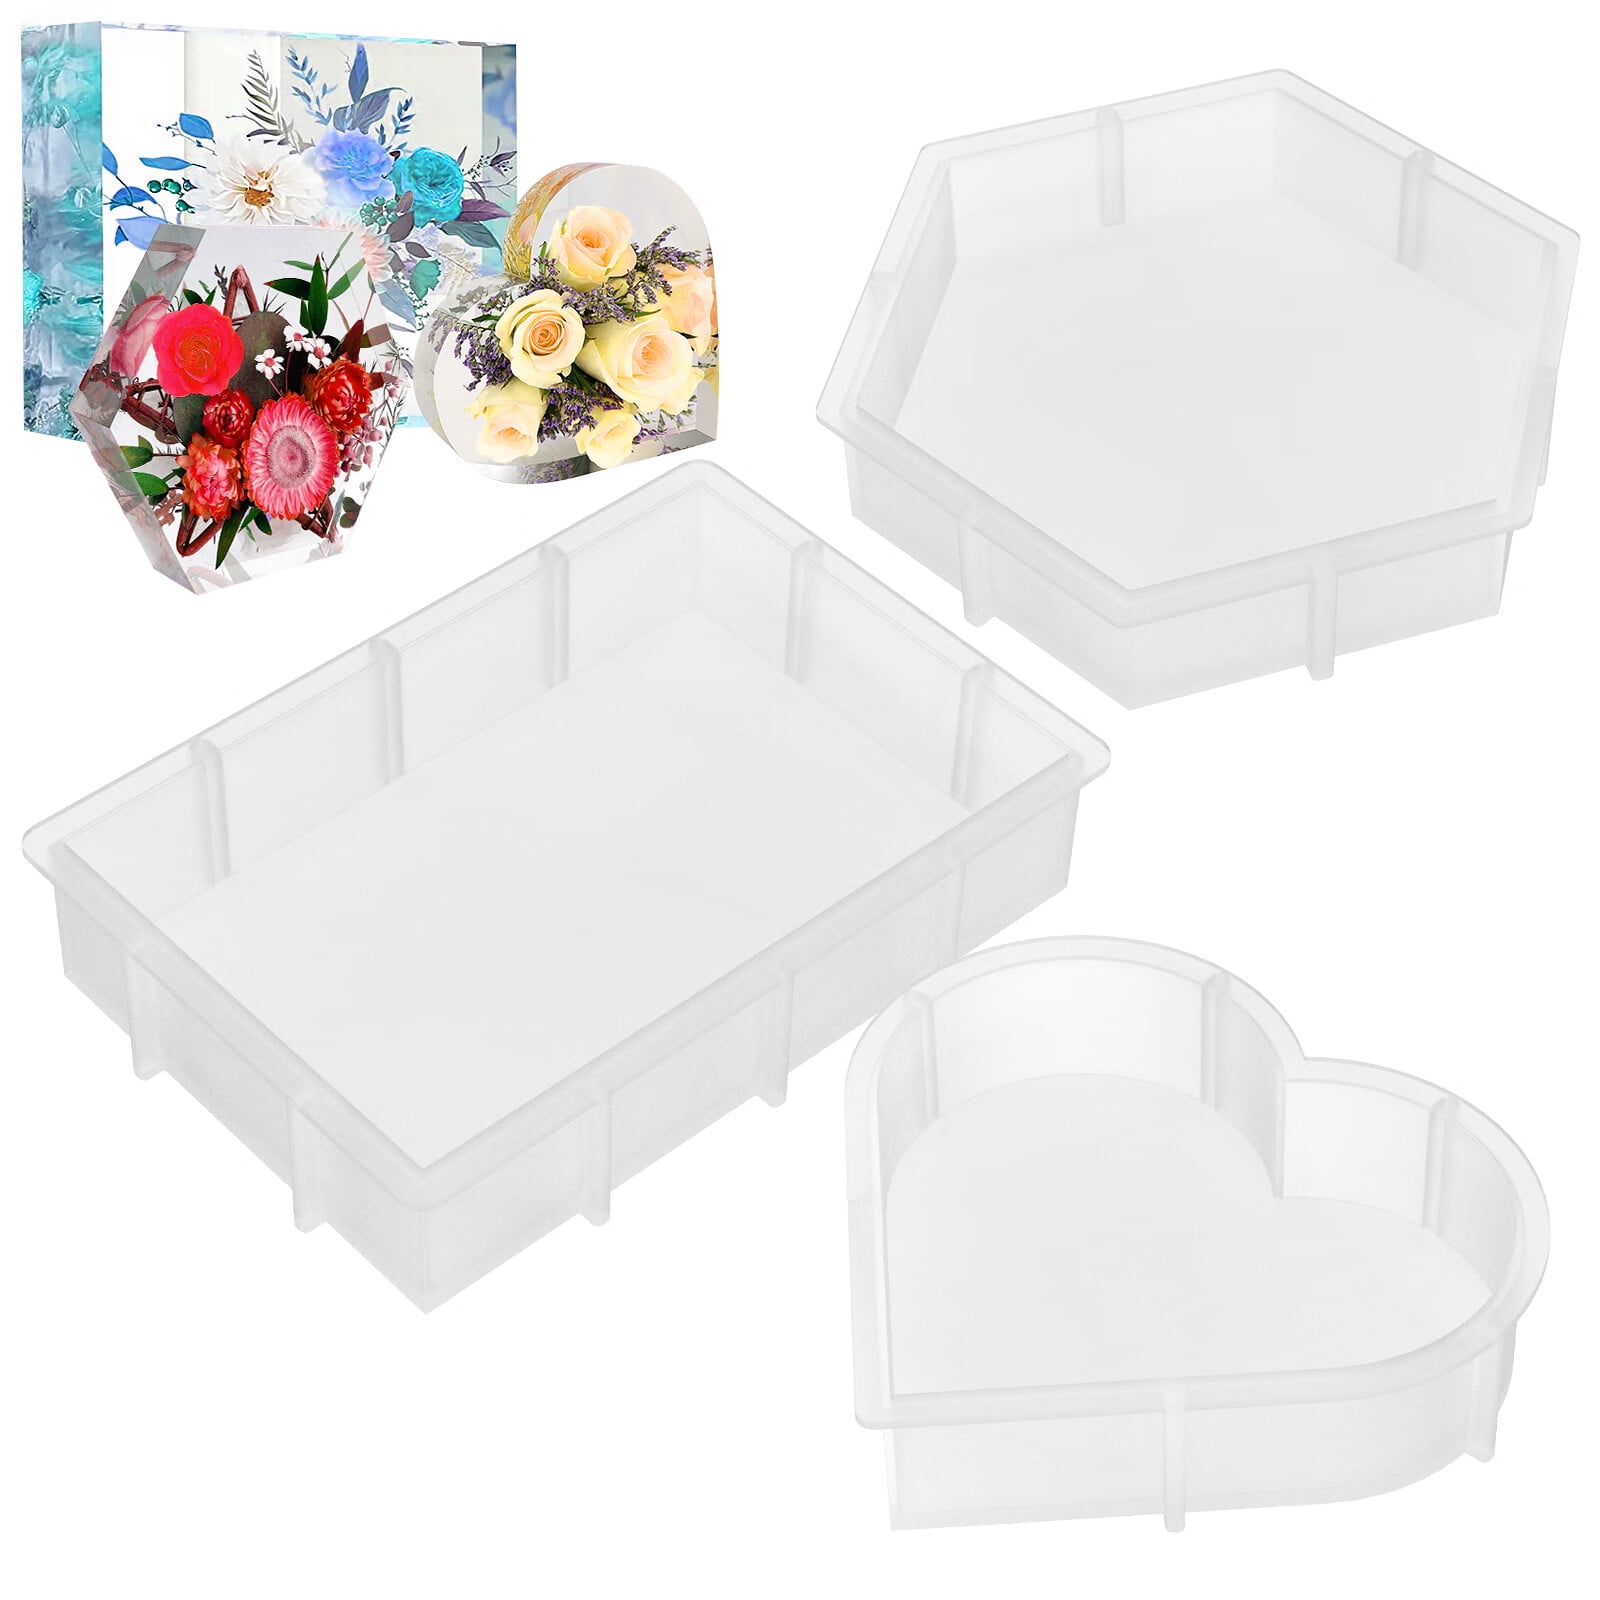 3D Cube Preservation Transparent Silicone Mold for Epoxy Resin Art